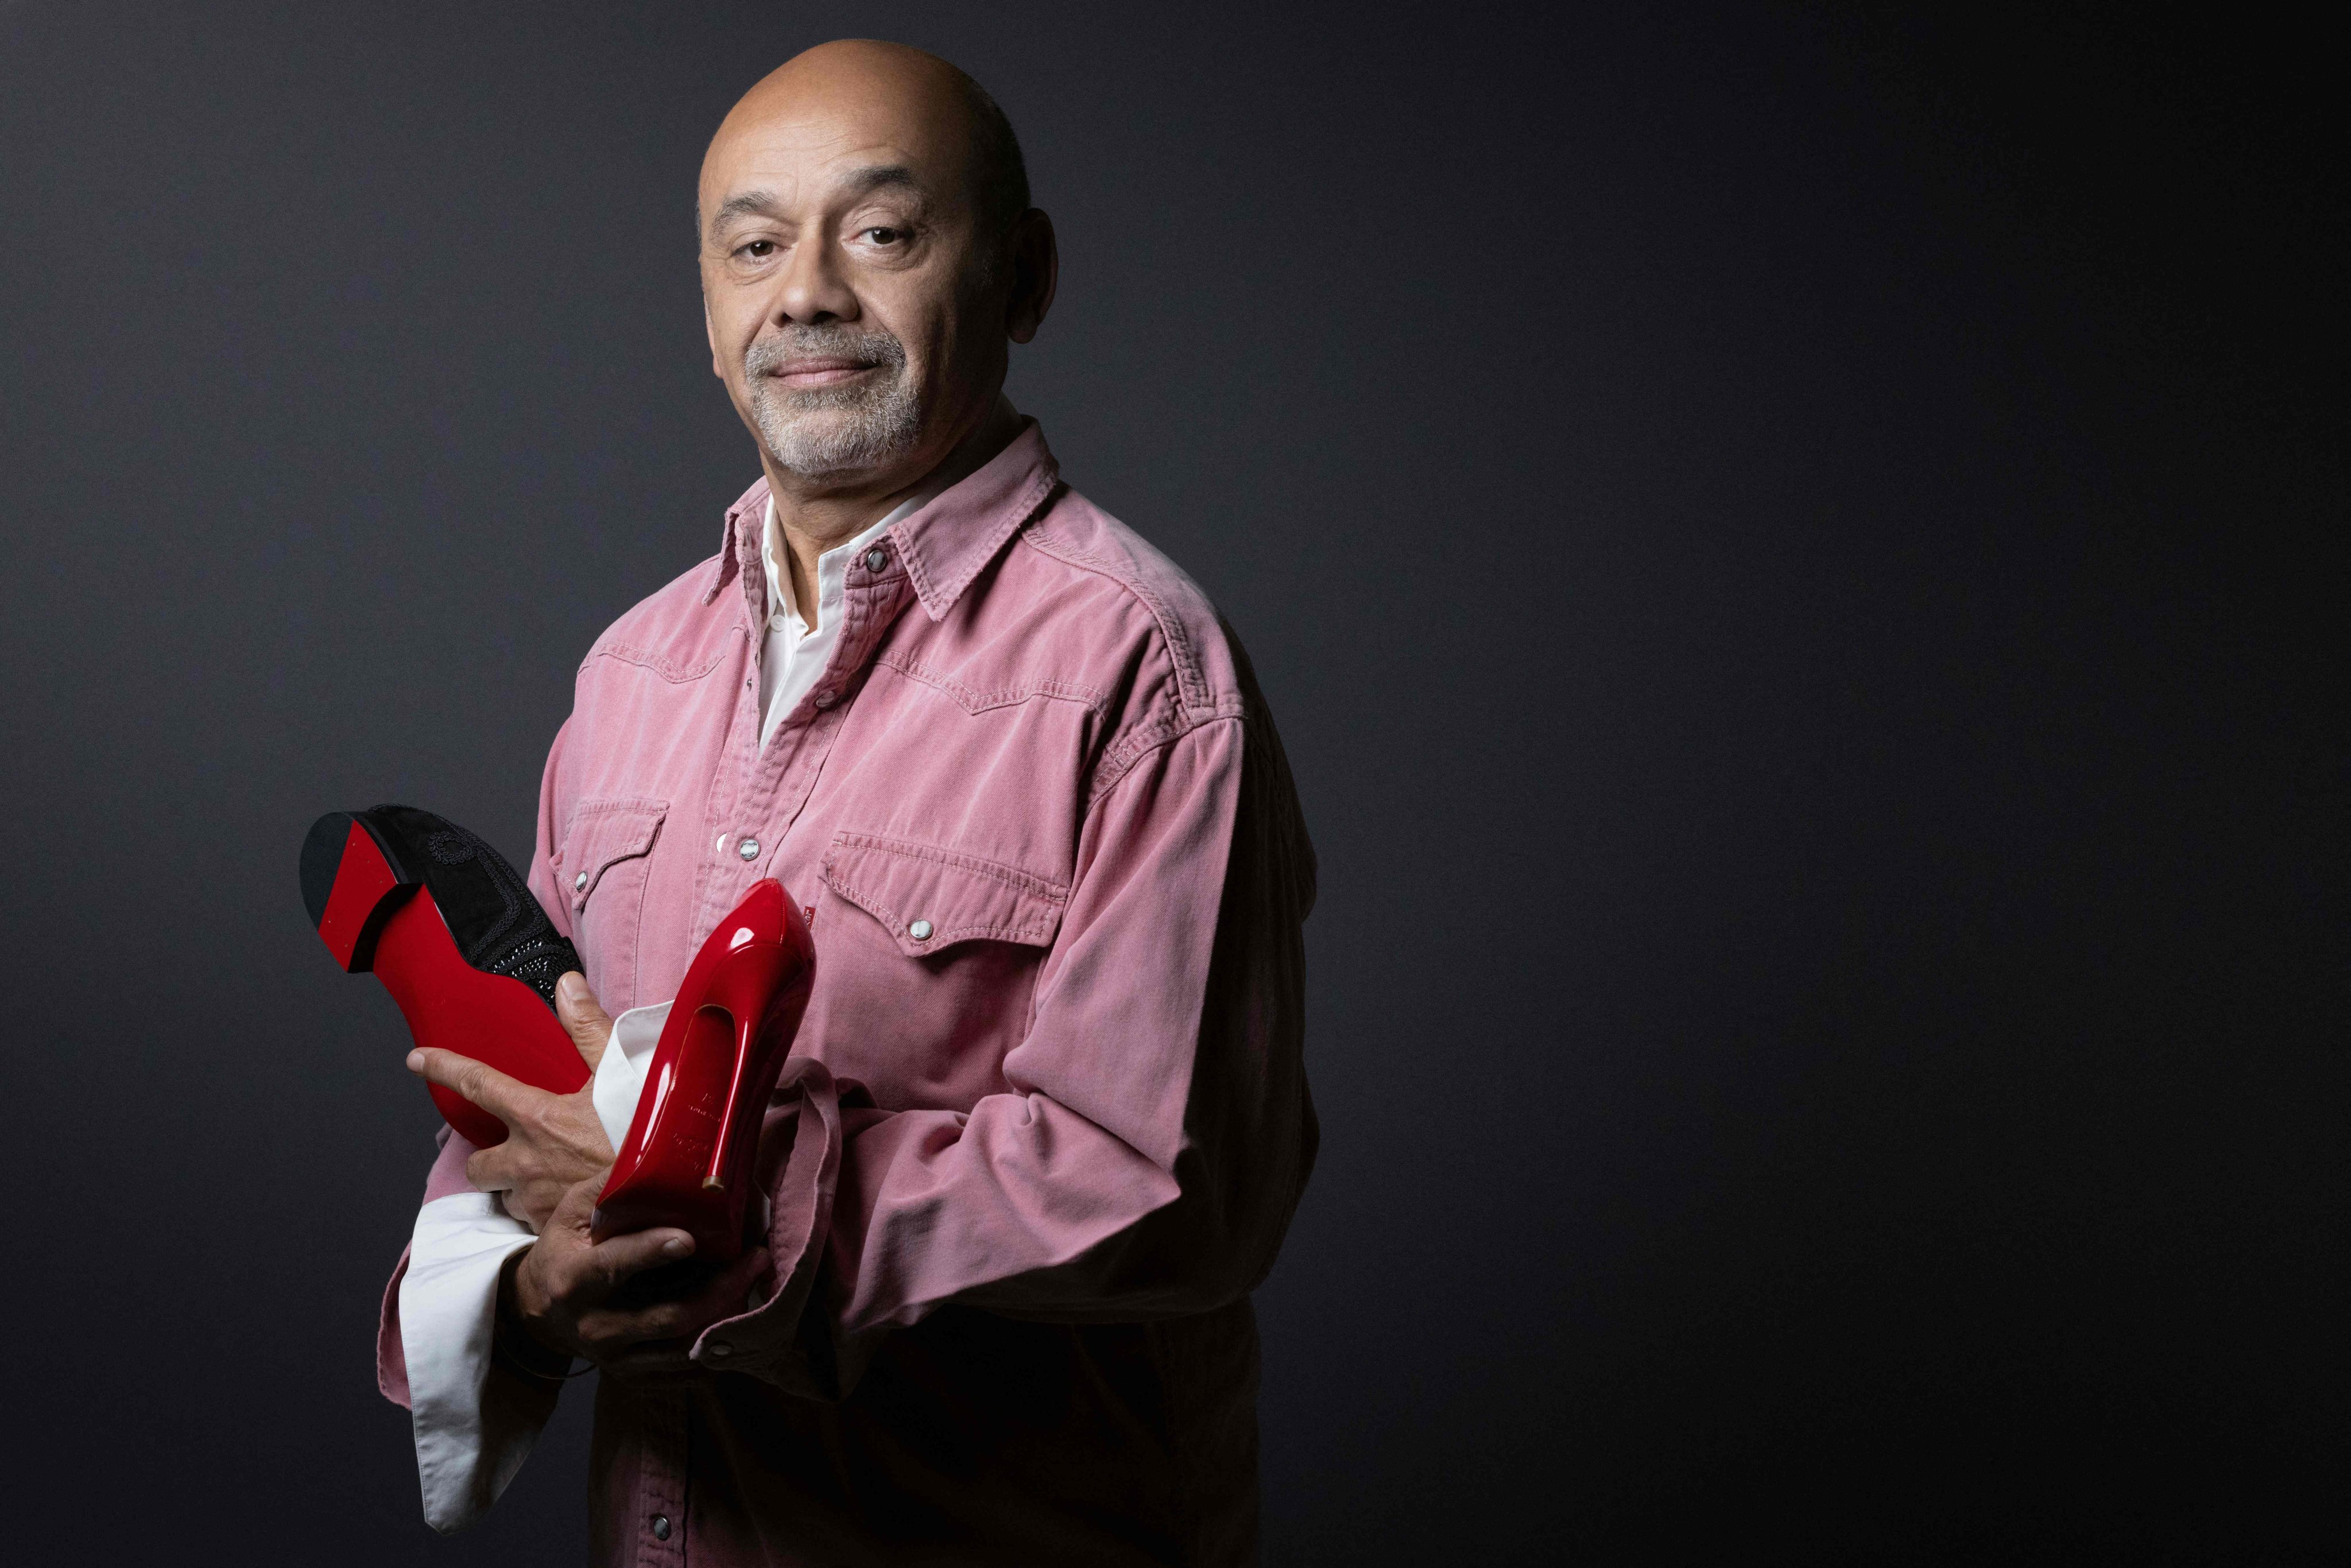 The iconic red soles - Christian Louboutin